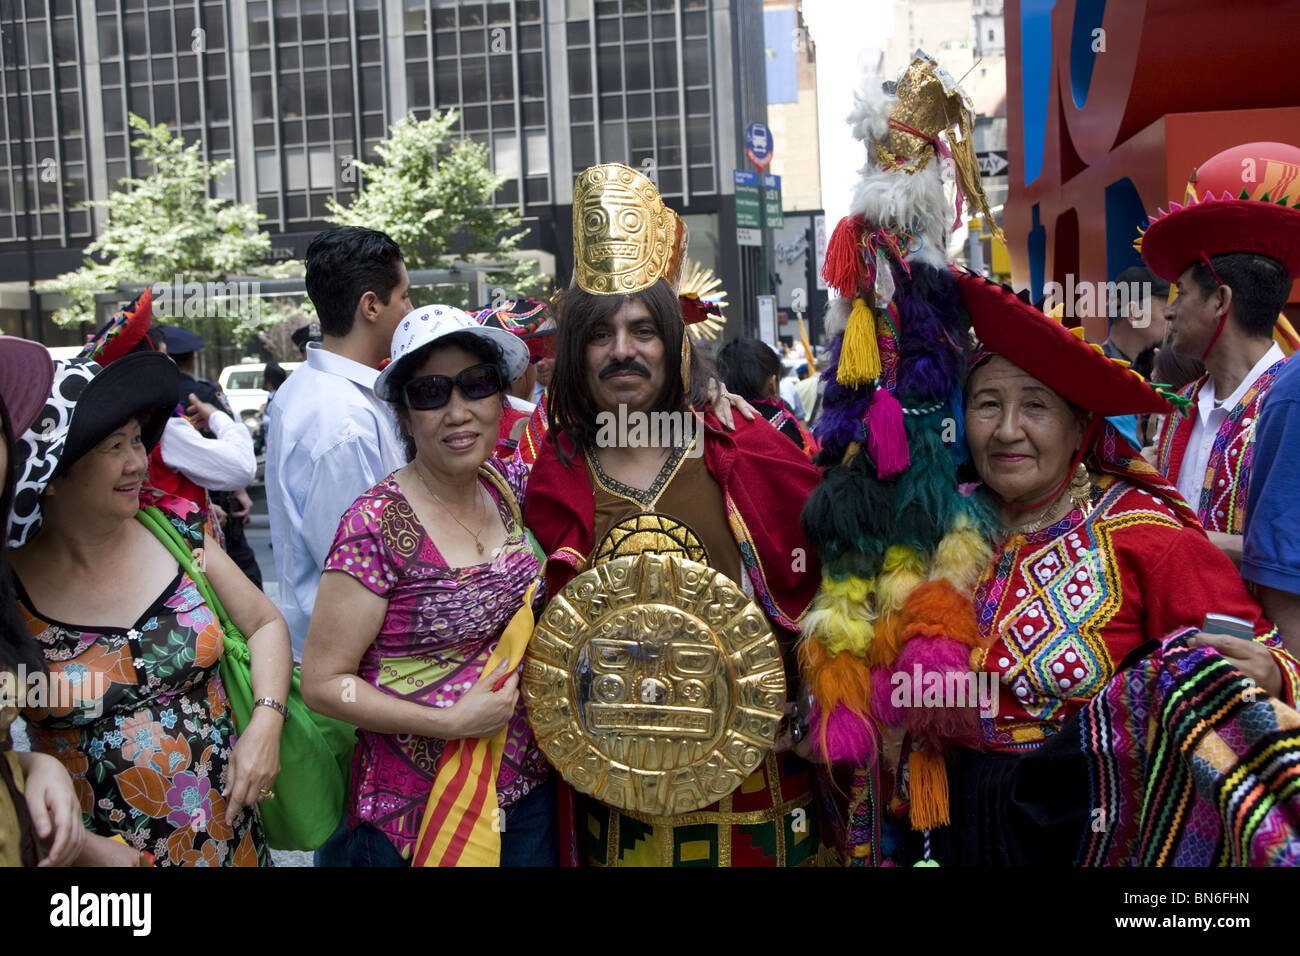 International Immigrants Parade, NYC: Portrait of Peruvian (R) and Vietnamese (L) immigrants on 6th Ave. in NYC. Stock Photo